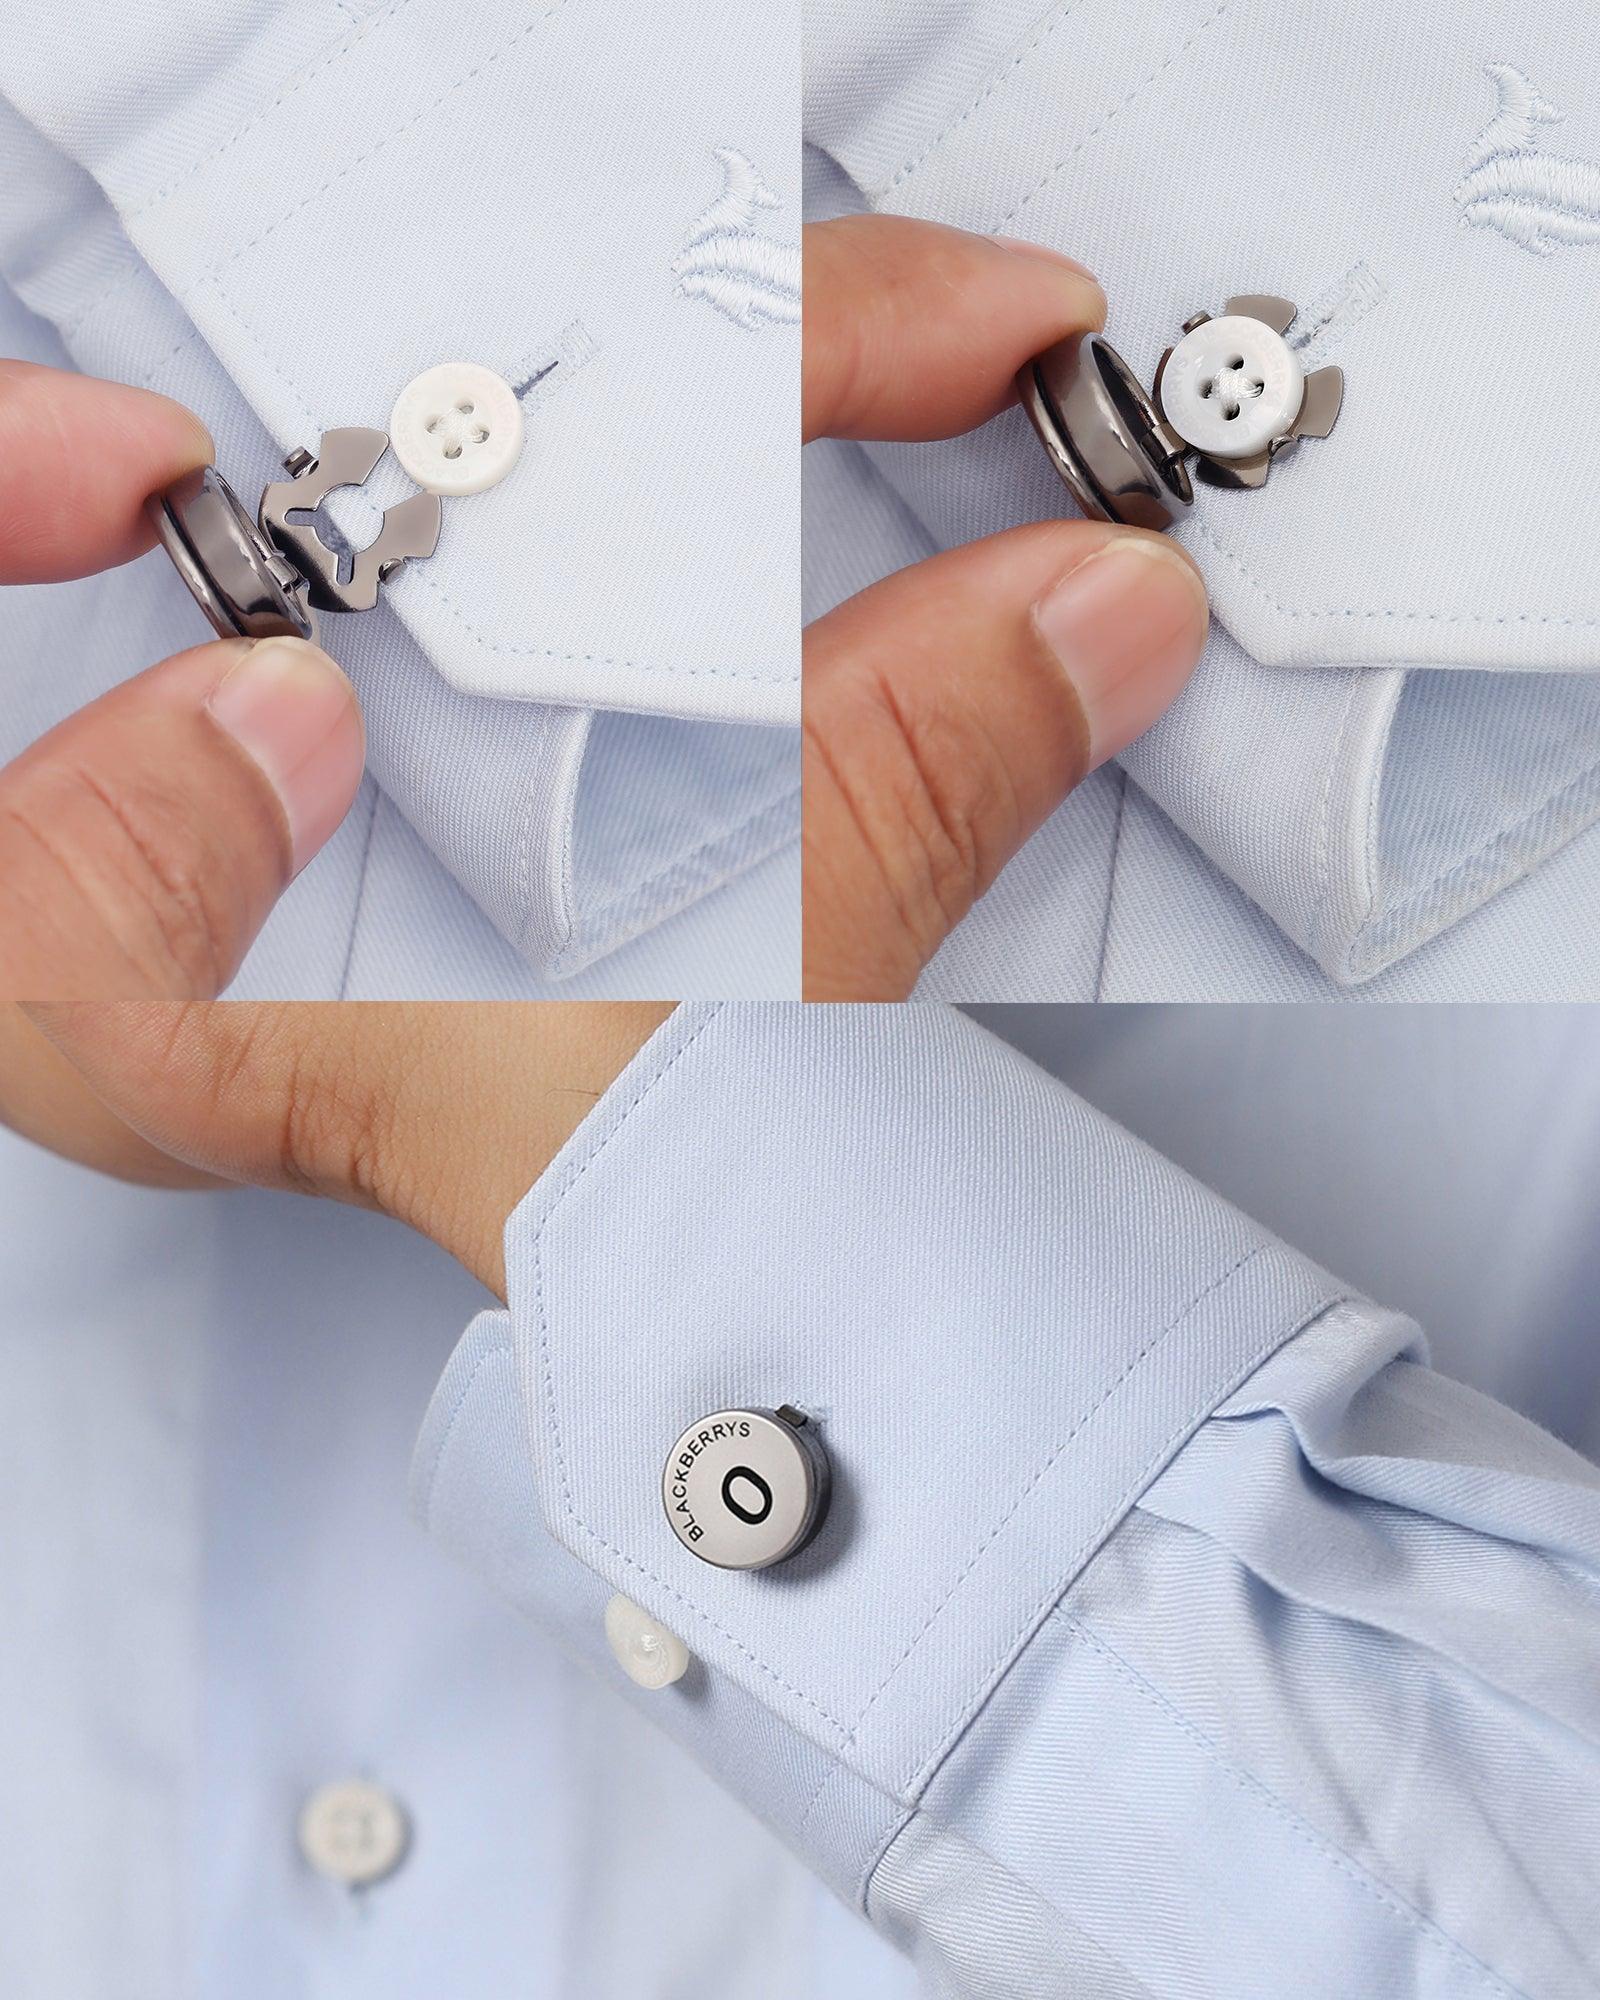 Personalised Shirt Button Cover With Alphabetic Initial-O